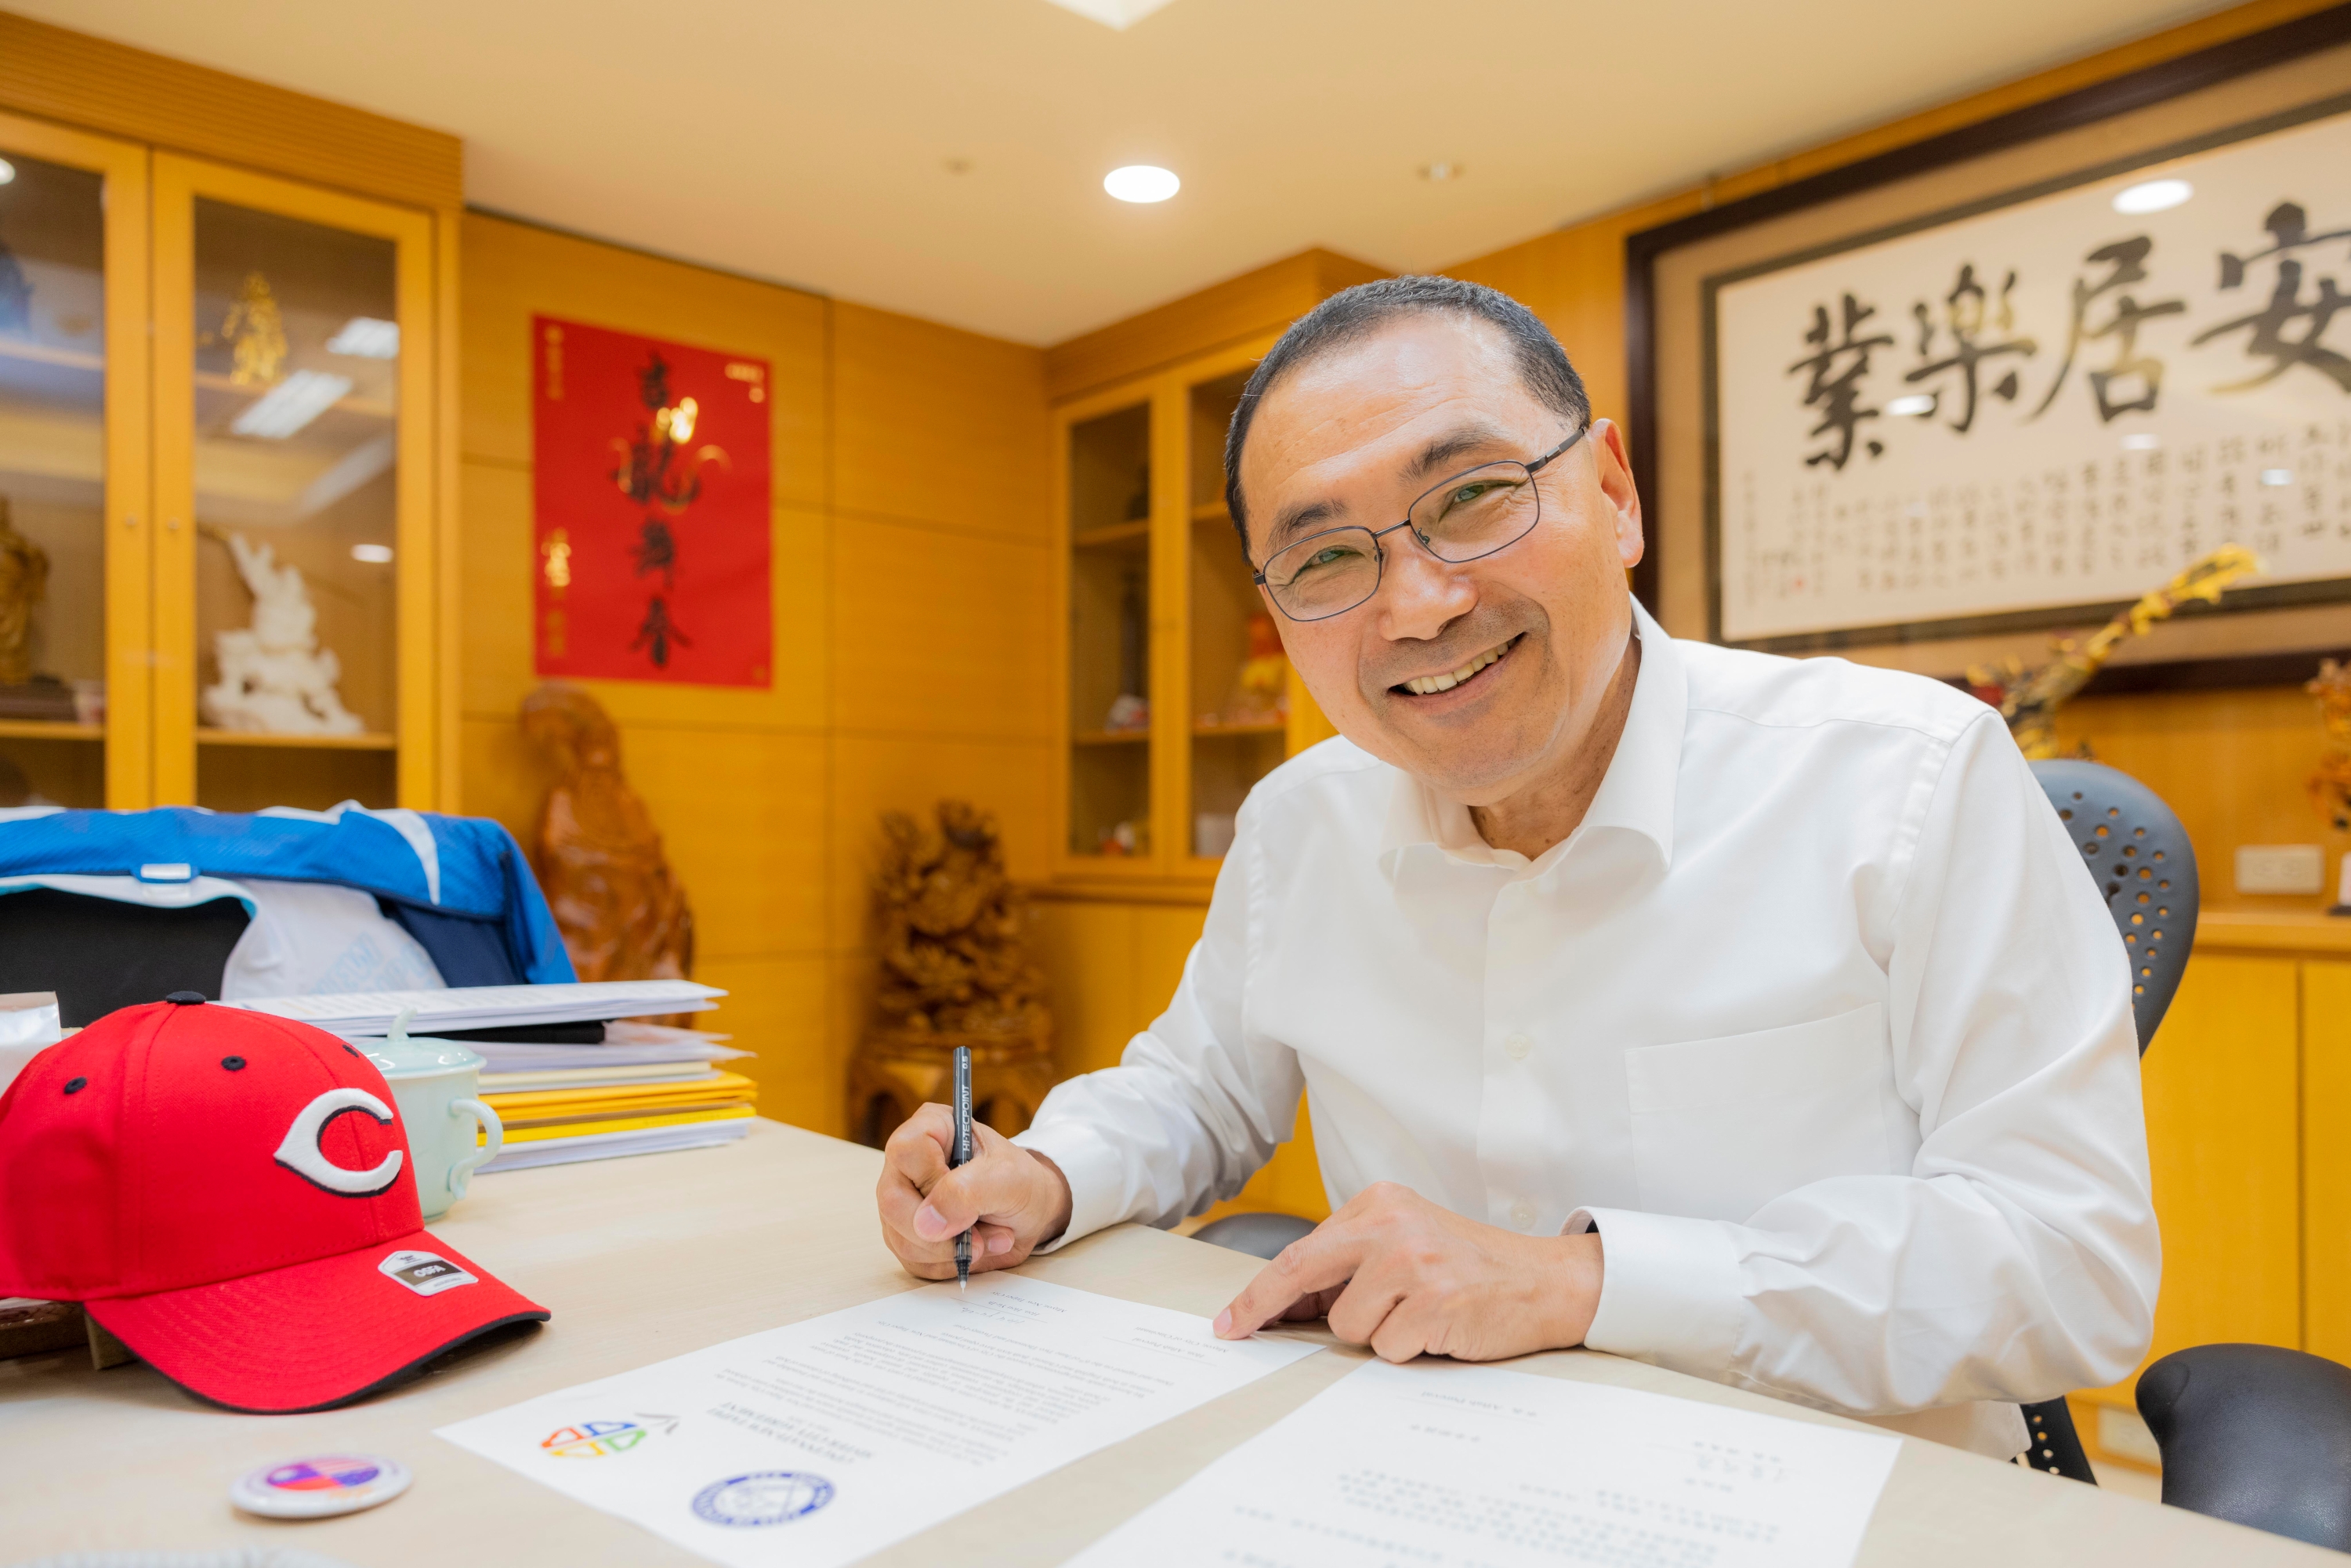 New Taipei City Mayor Hou Yu-ih is delighted to renew the sister city agreement with Cincinnati, and, as a sports enthusiast, he unboxes a Cincinnati Reds baseball cap.